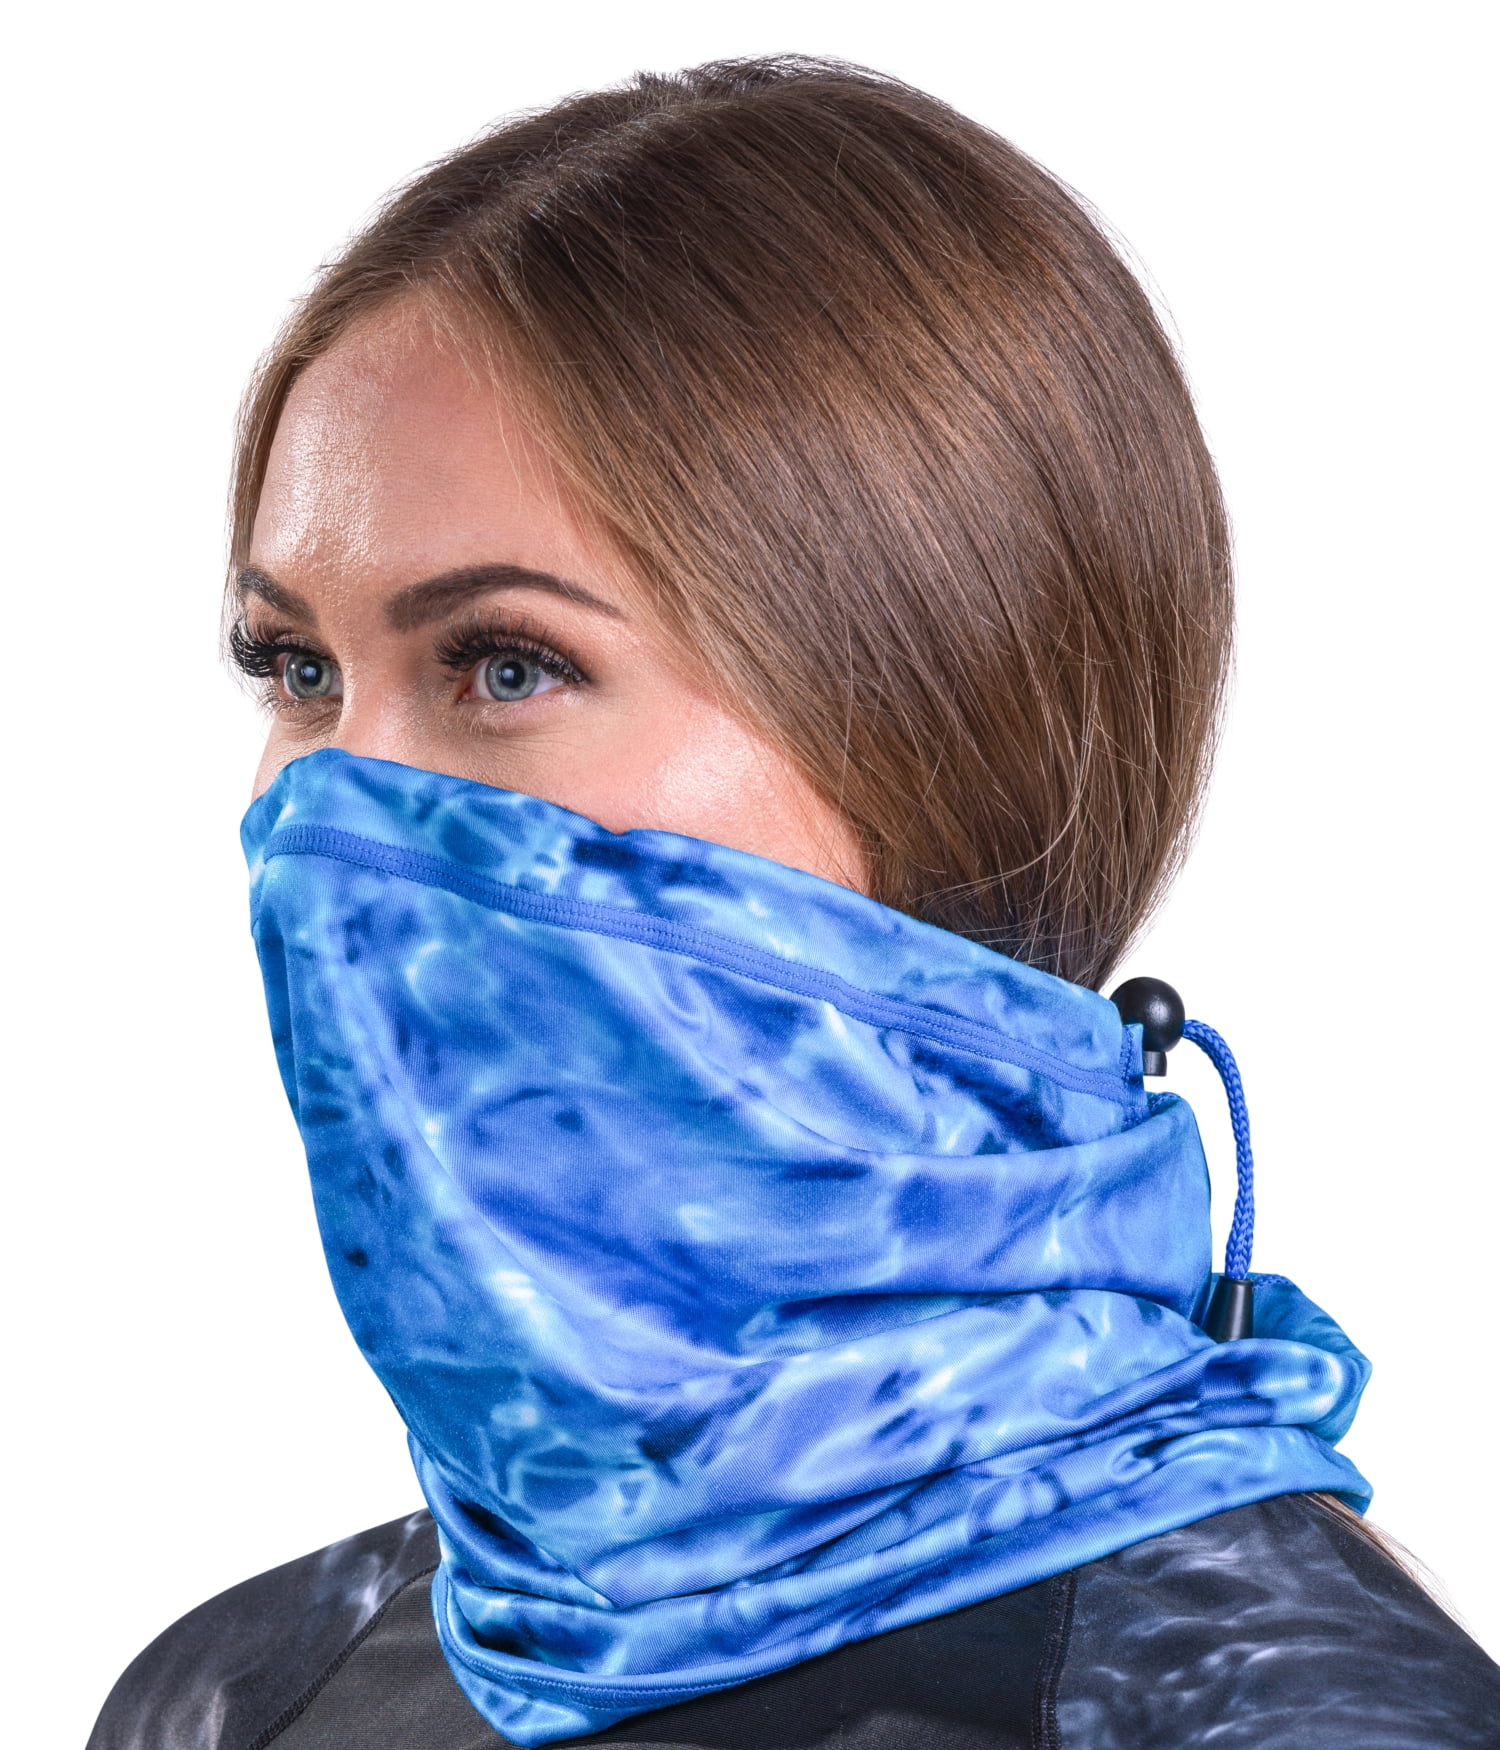 Details about   2PC Neck Gaiter Face Mask Cooling Bandana Breathable Scarf UV Balaclava Headwear 